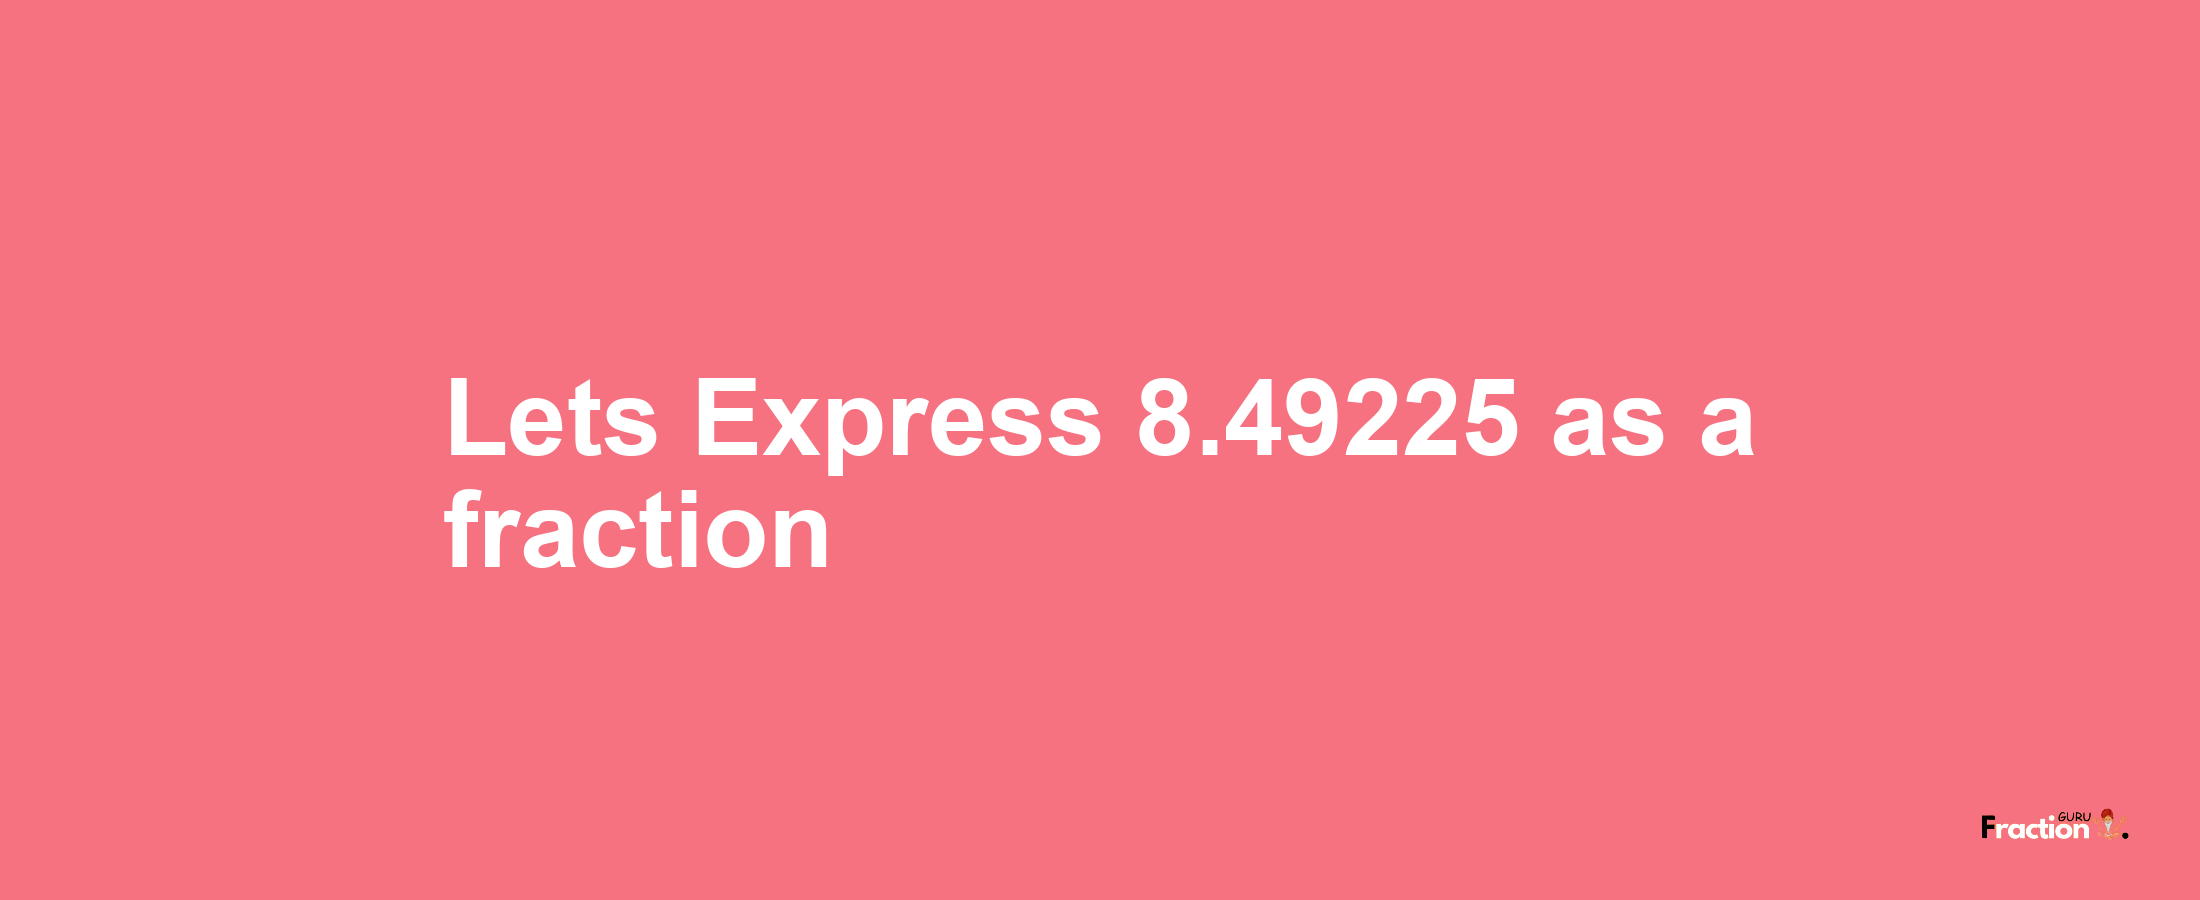 Lets Express 8.49225 as afraction